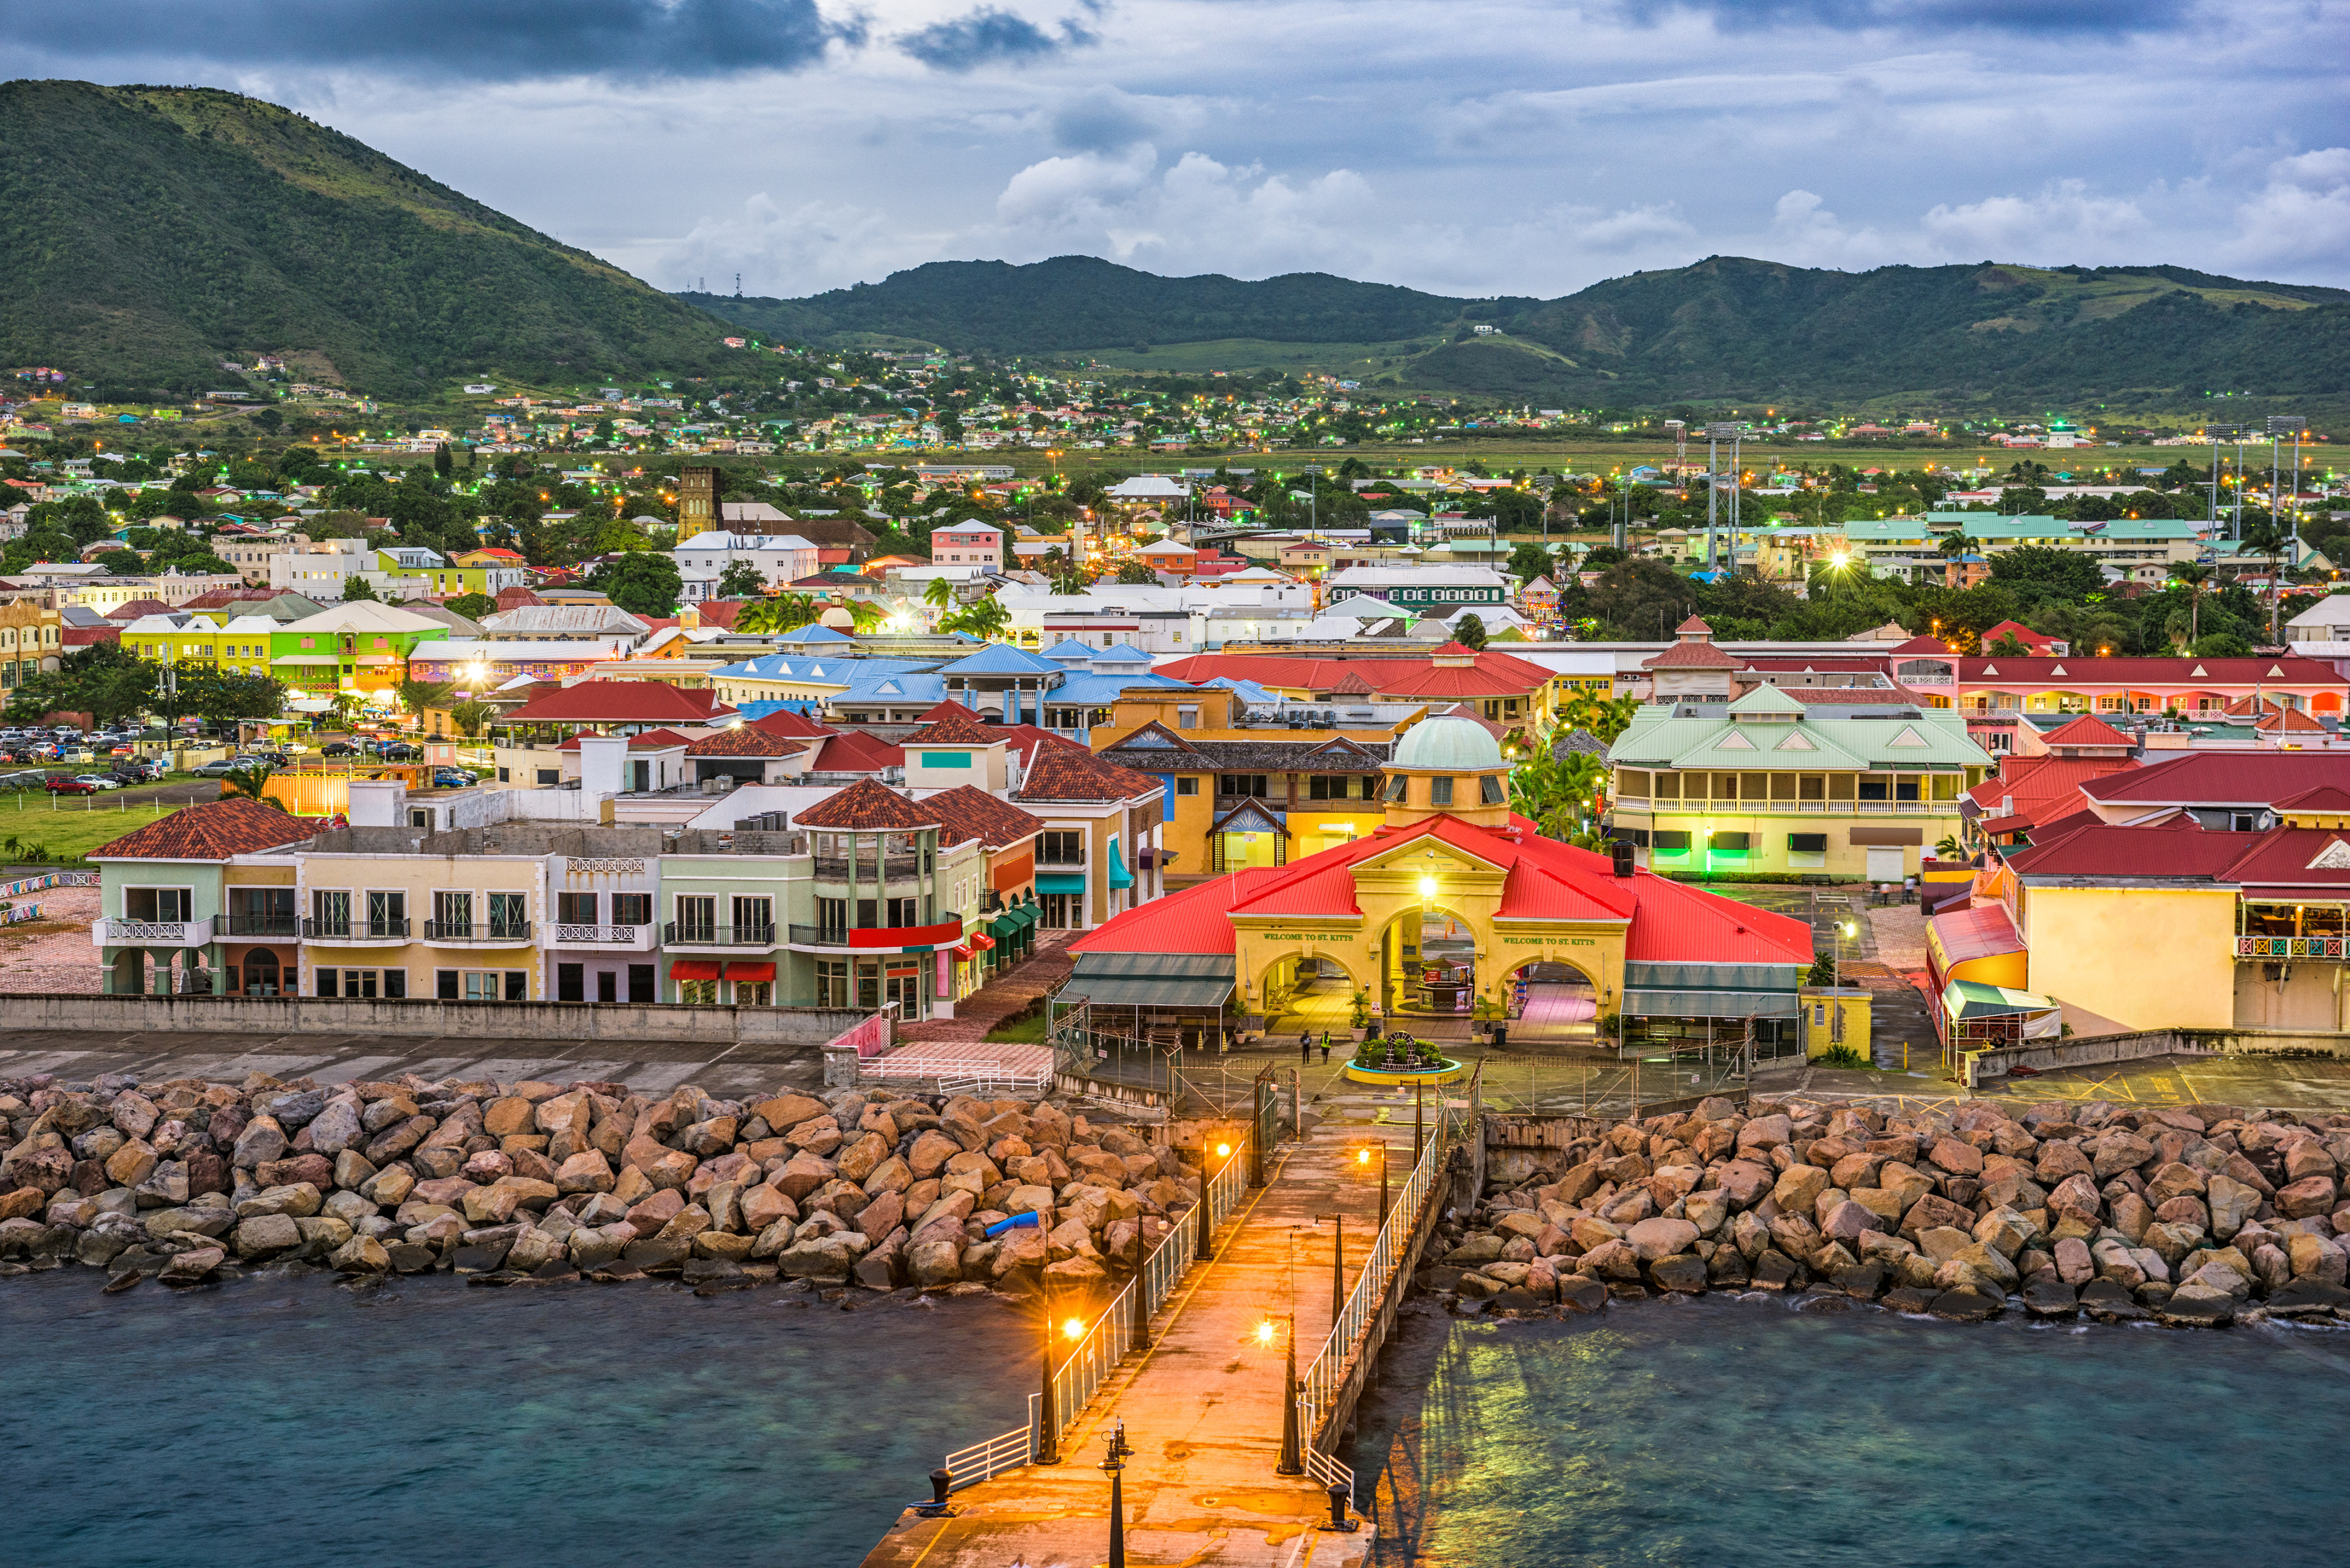 Citizenship-by-investment schemes rake in more than US$579 million a year in the Caribbean. Photo: Shutterstock 